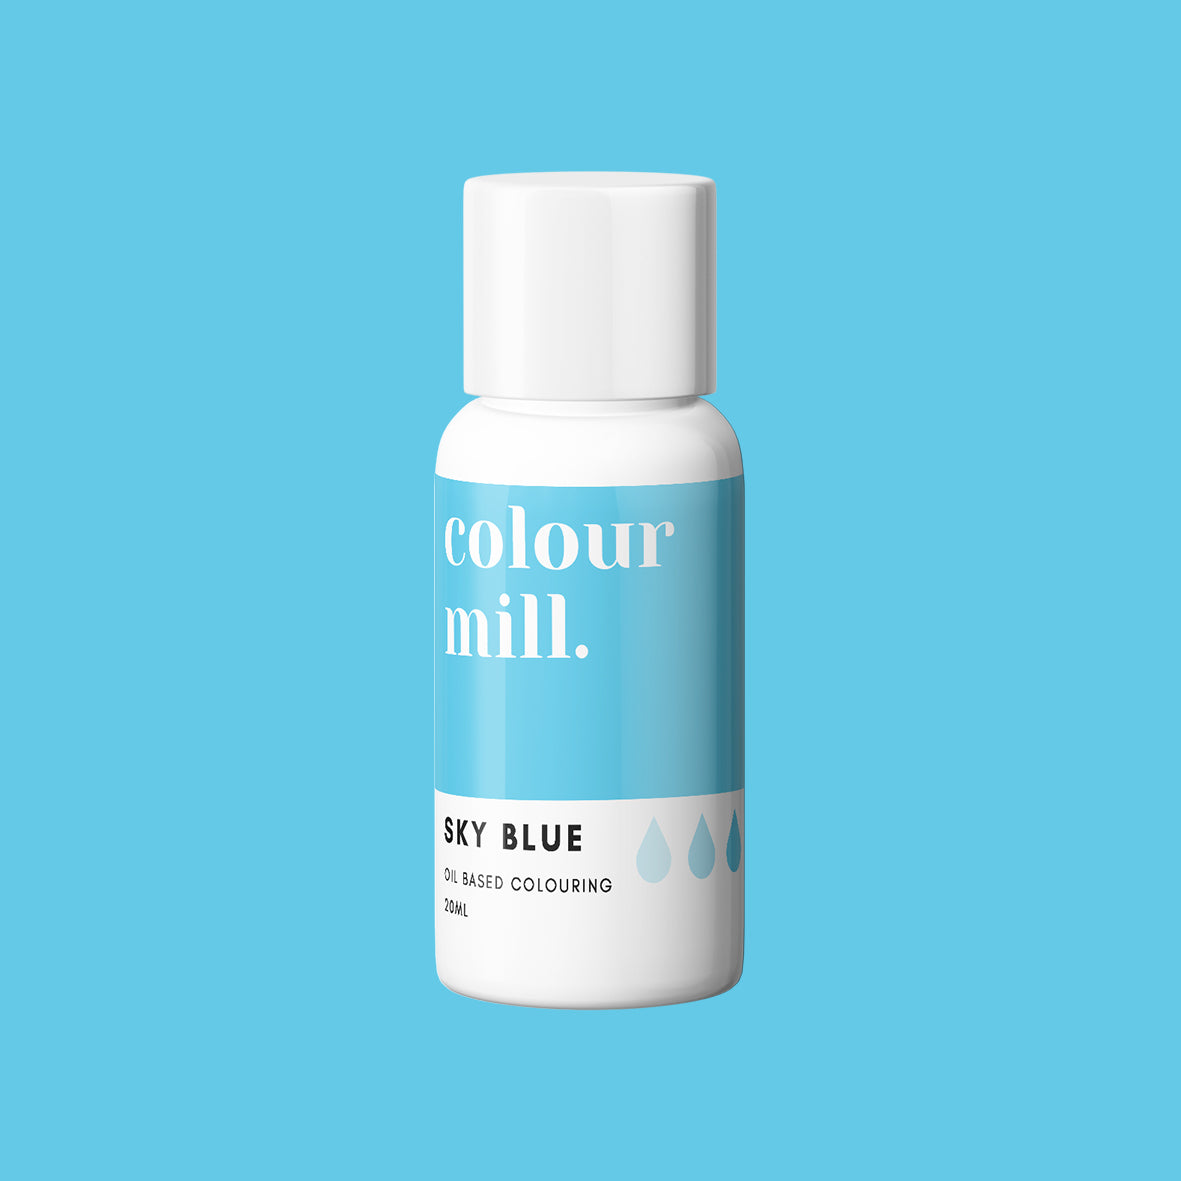 SKY BLUE oil based concentrated icing colouring 20ml